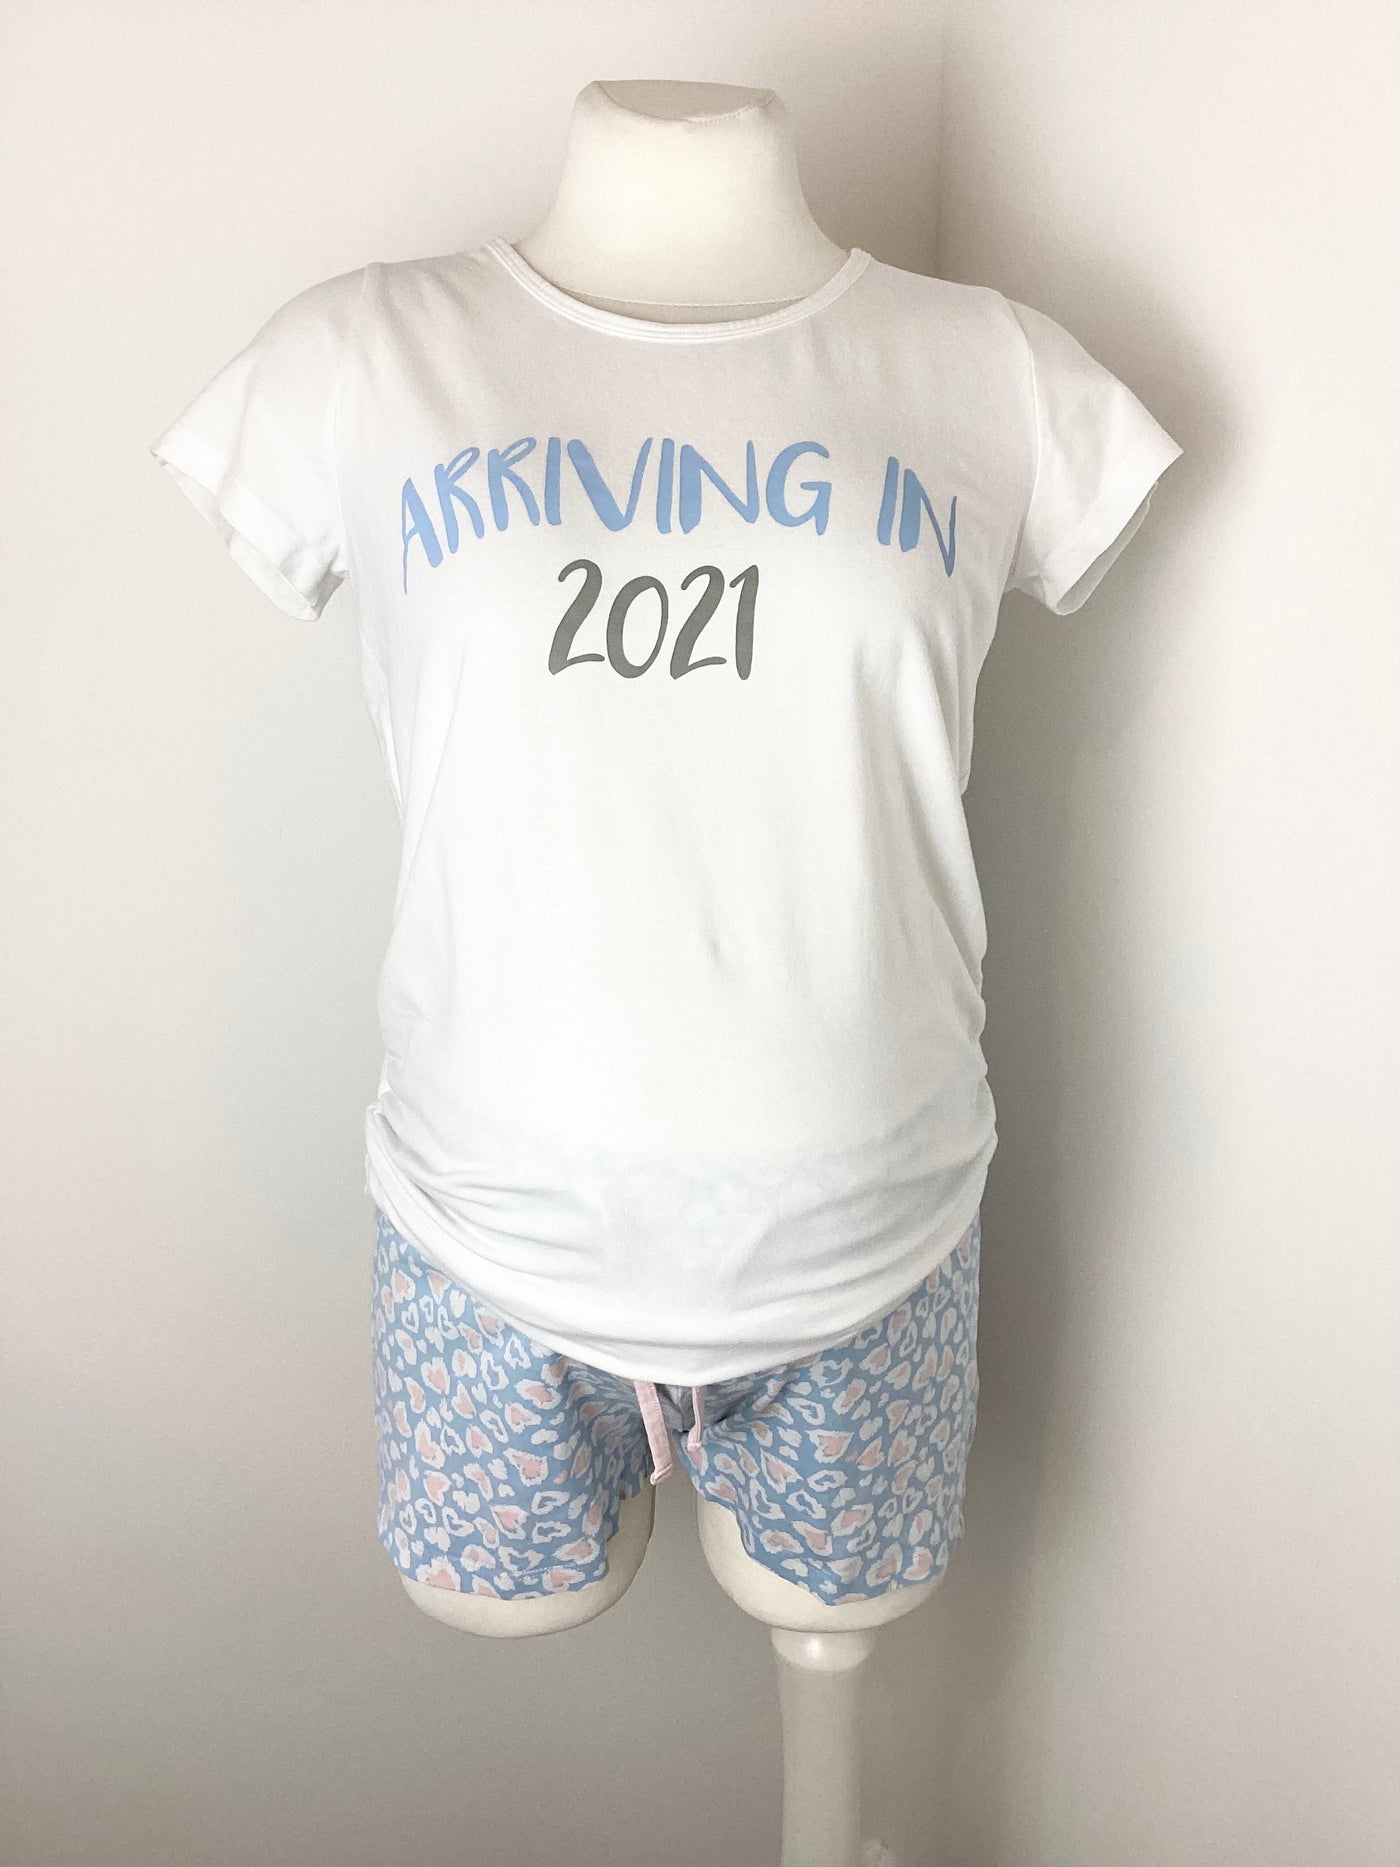 Avenue Maternity 'Arriving in 2021' shorts & t-shirt pyjama set (free of charge due to out of date slogan) - Size 8/10